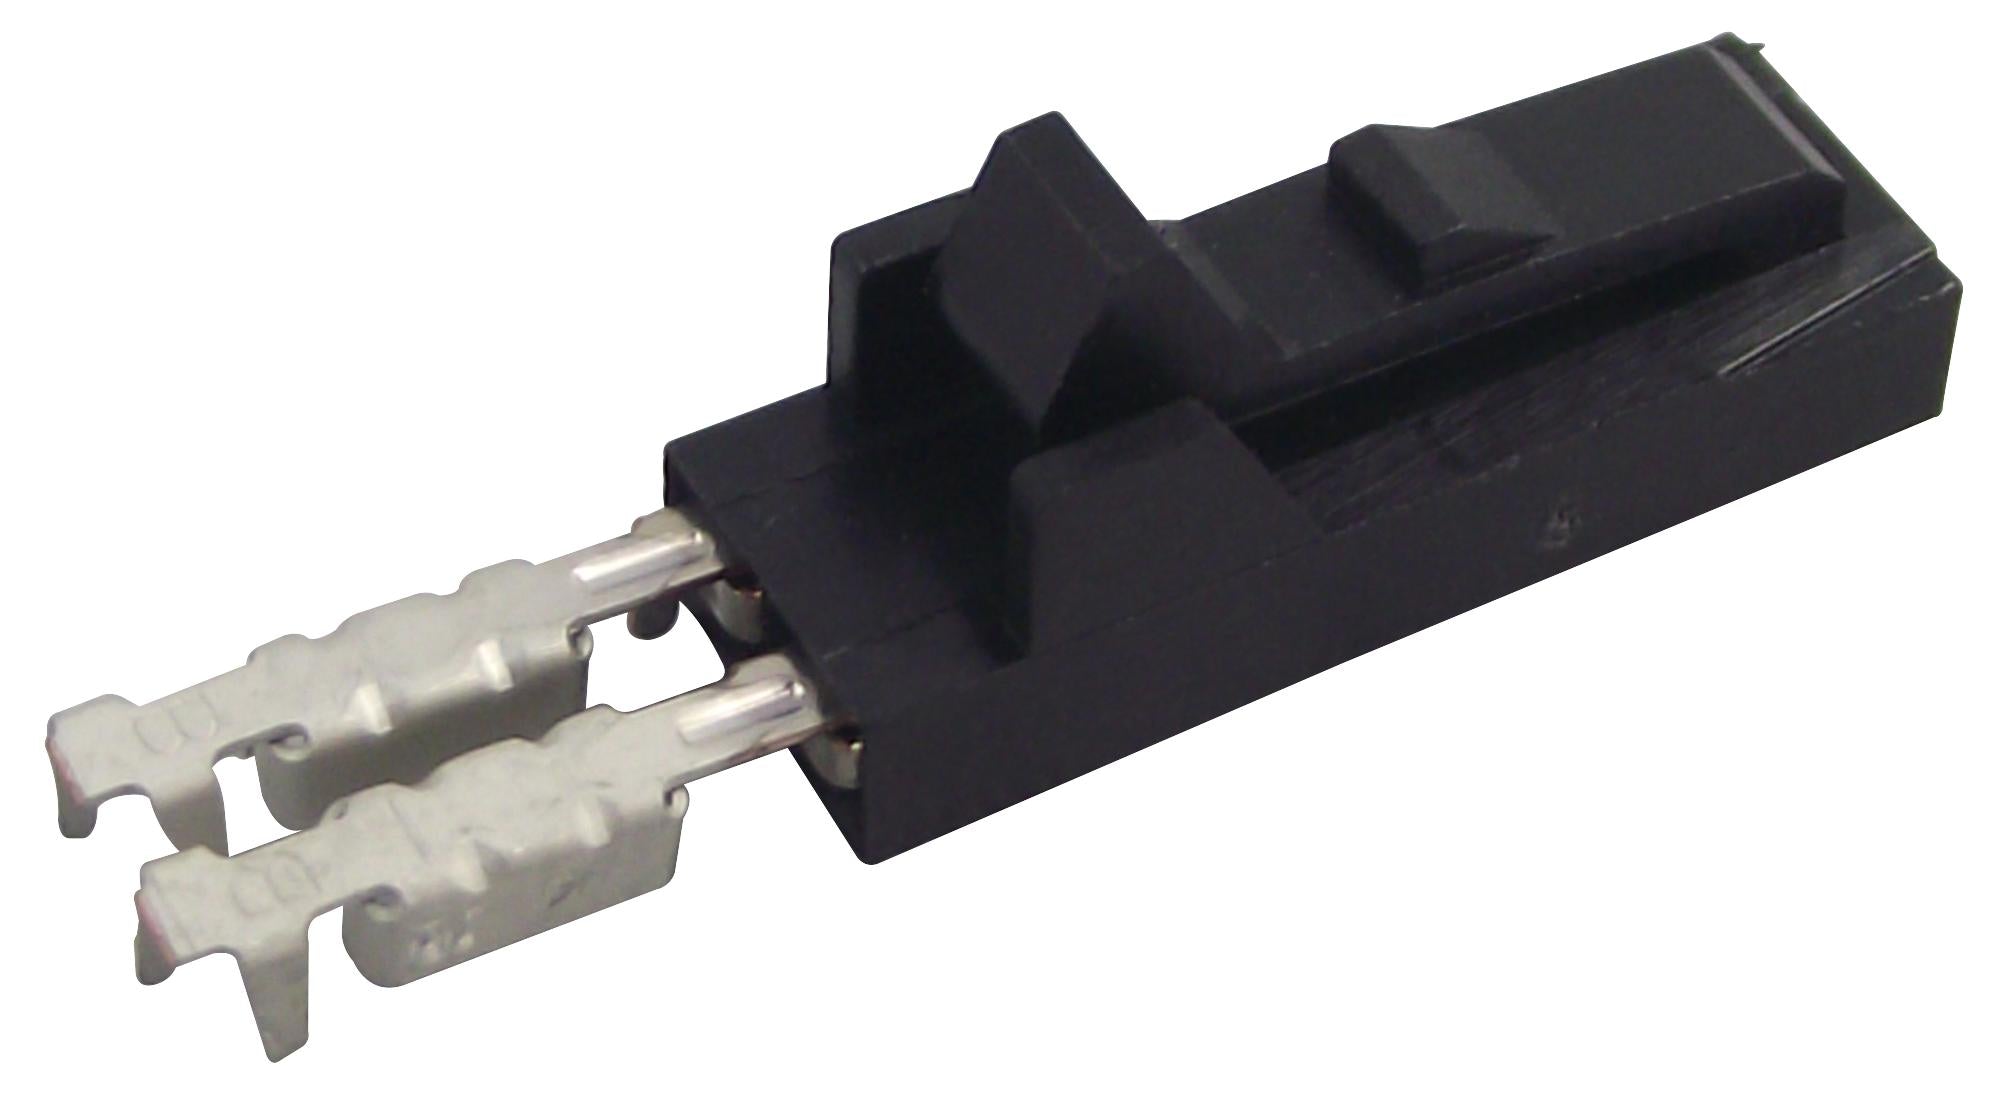 5-103957-1 CONNECTOR, RCPT, 2POS, 1ROW, 2.54MM AMP - TE CONNECTIVITY